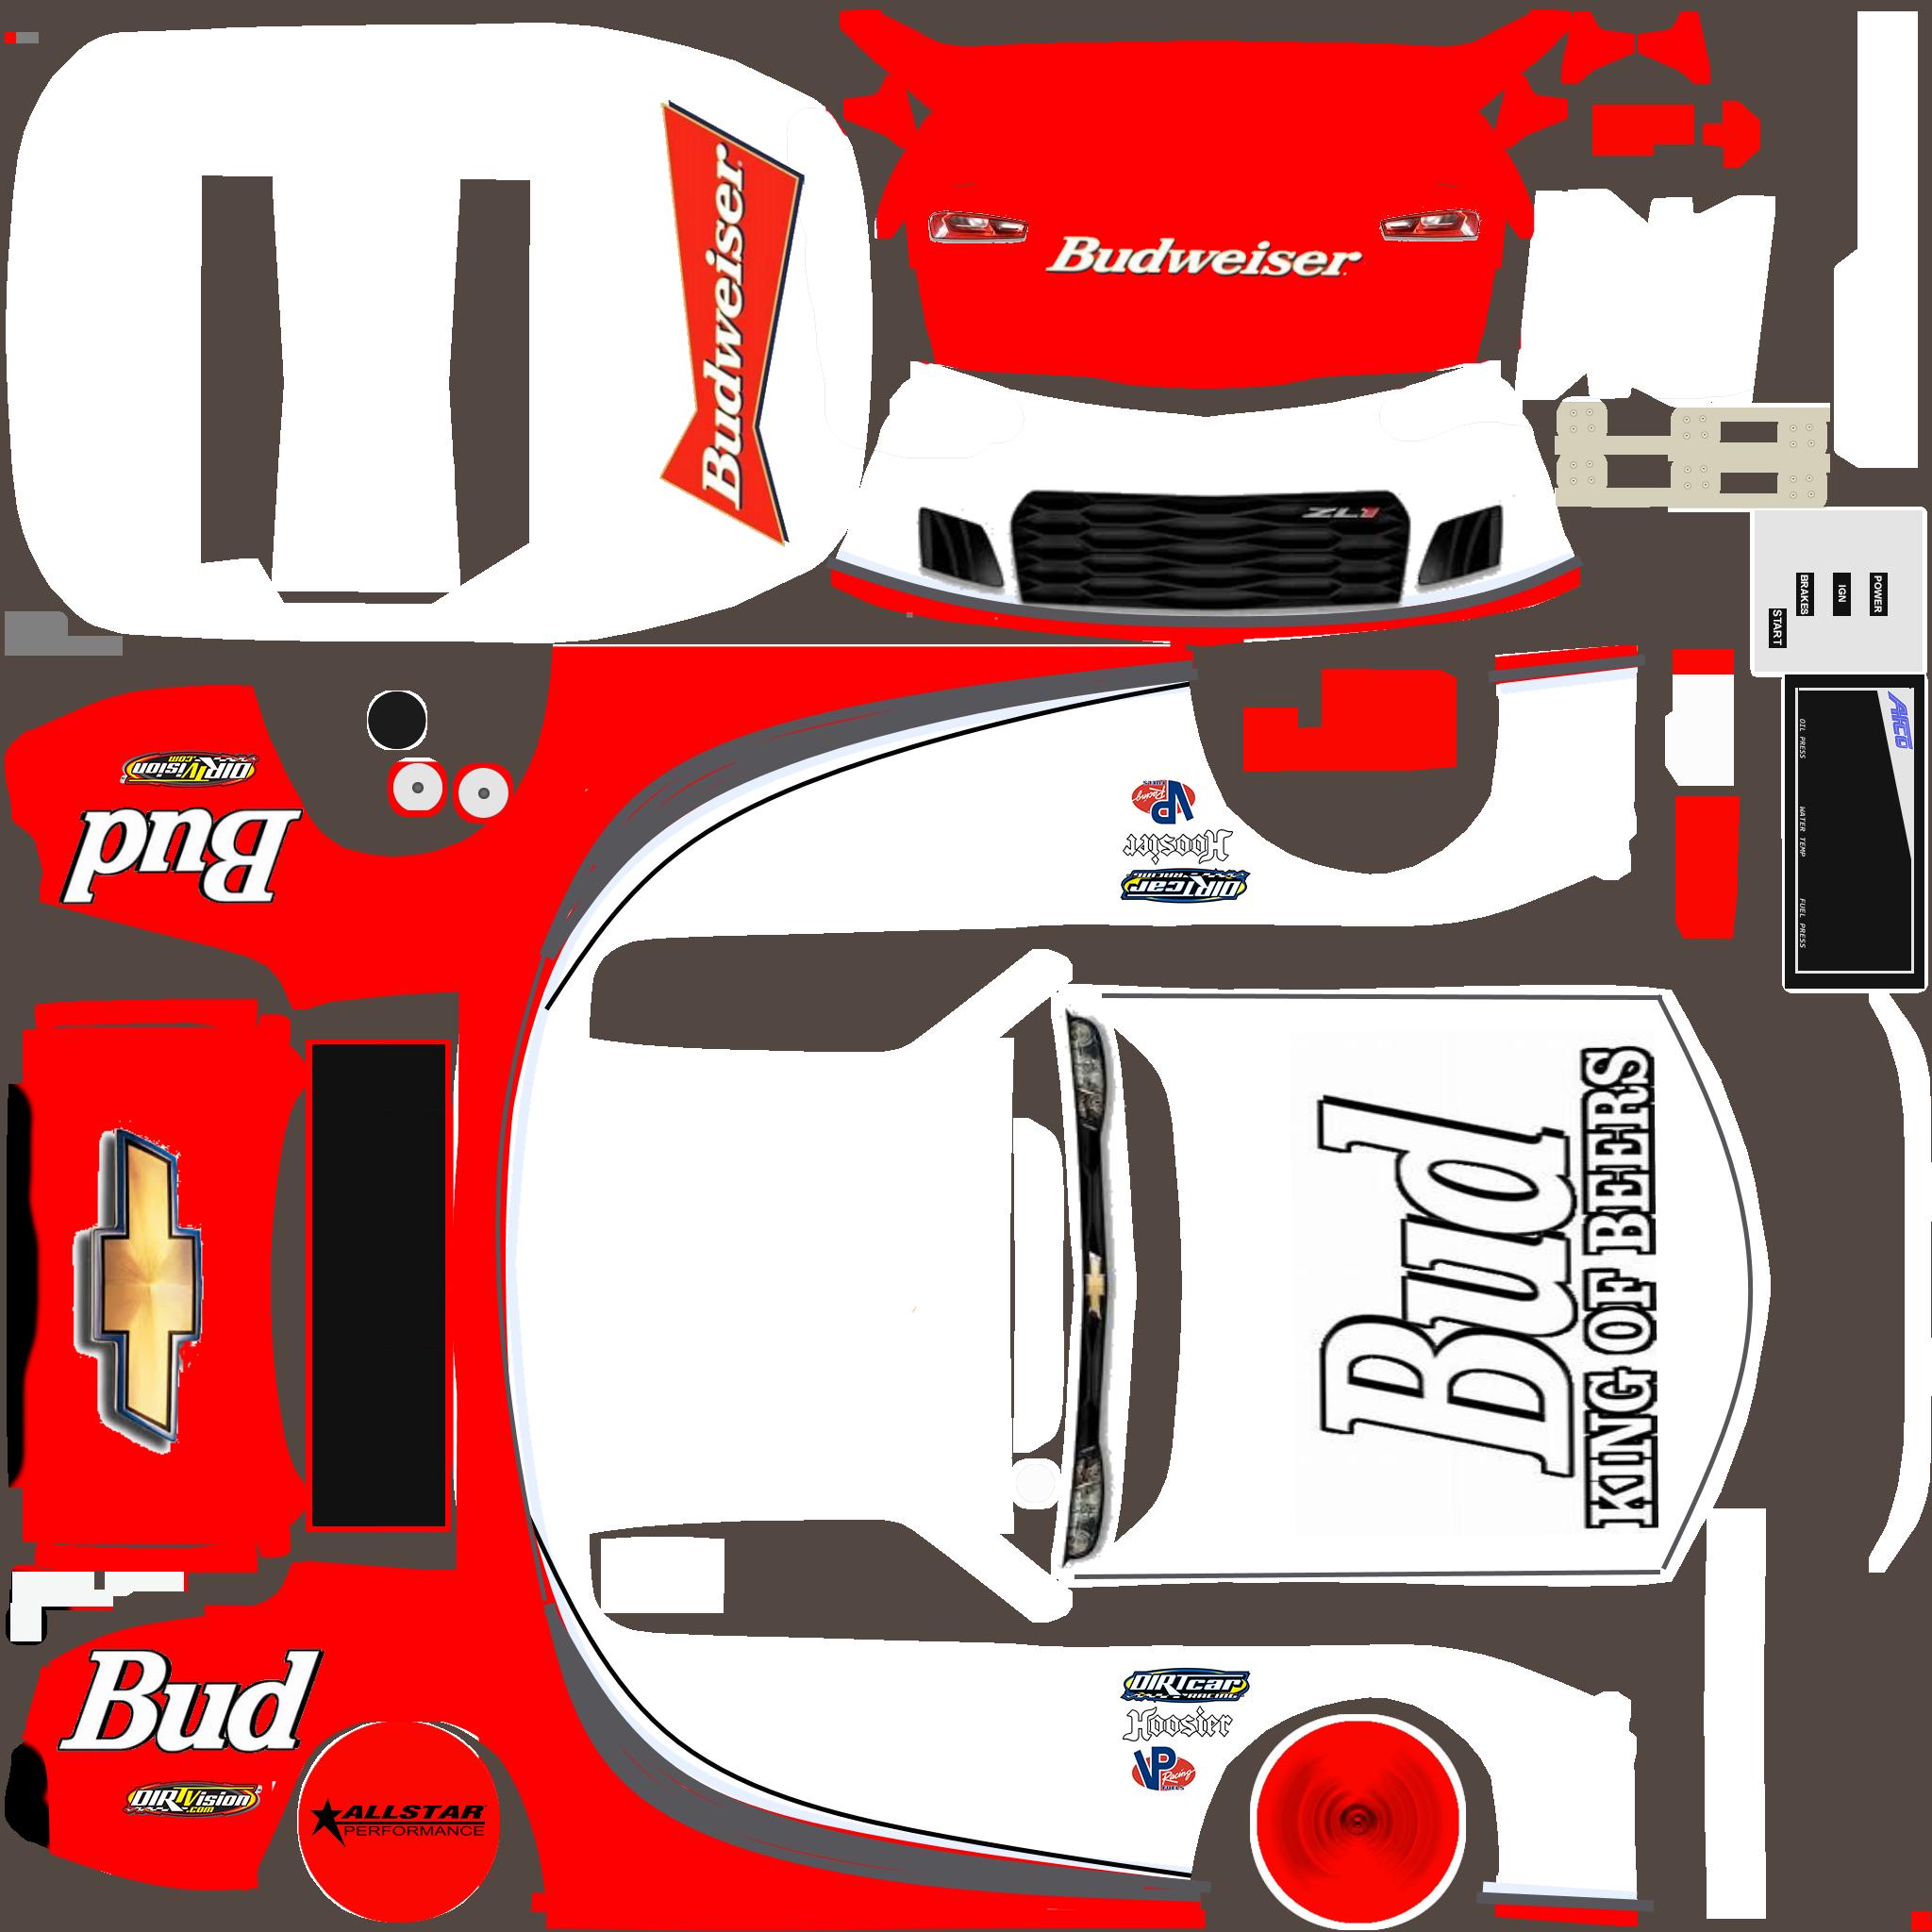 Bud Dirt Street Stock by Greg Sweet2 - Trading Paints